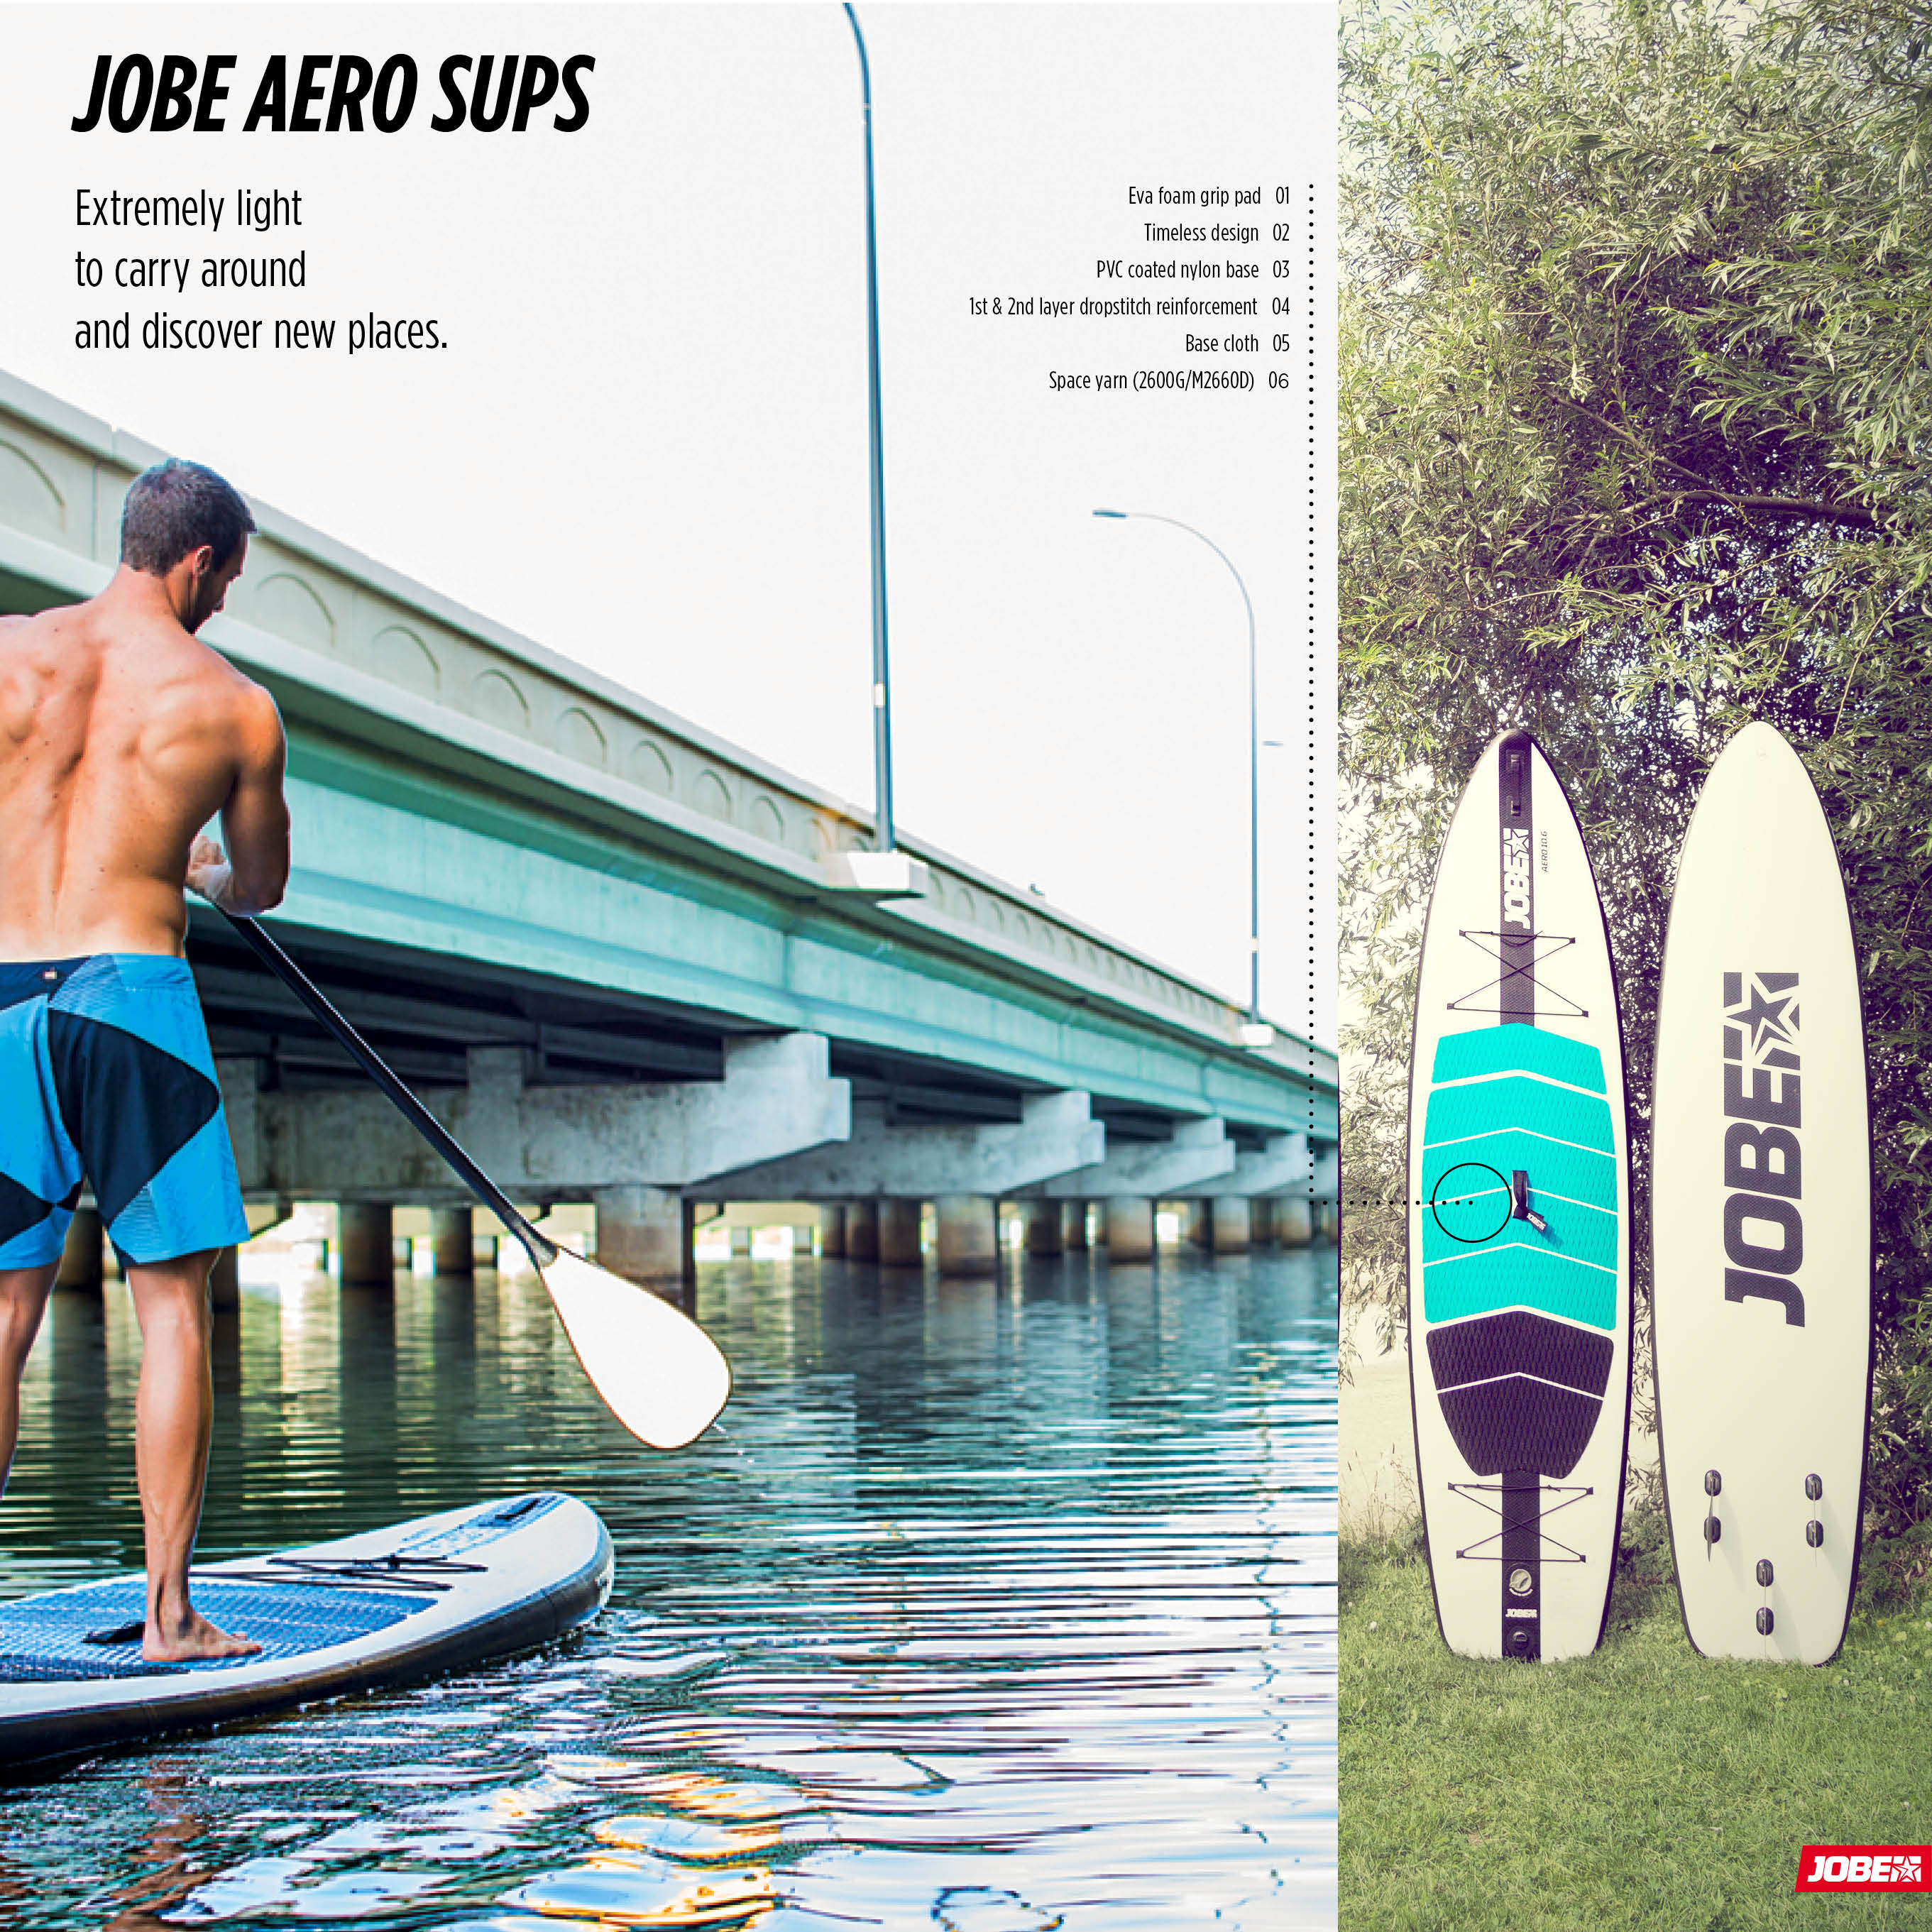 One of the lightest inflatable SUP boards in the market